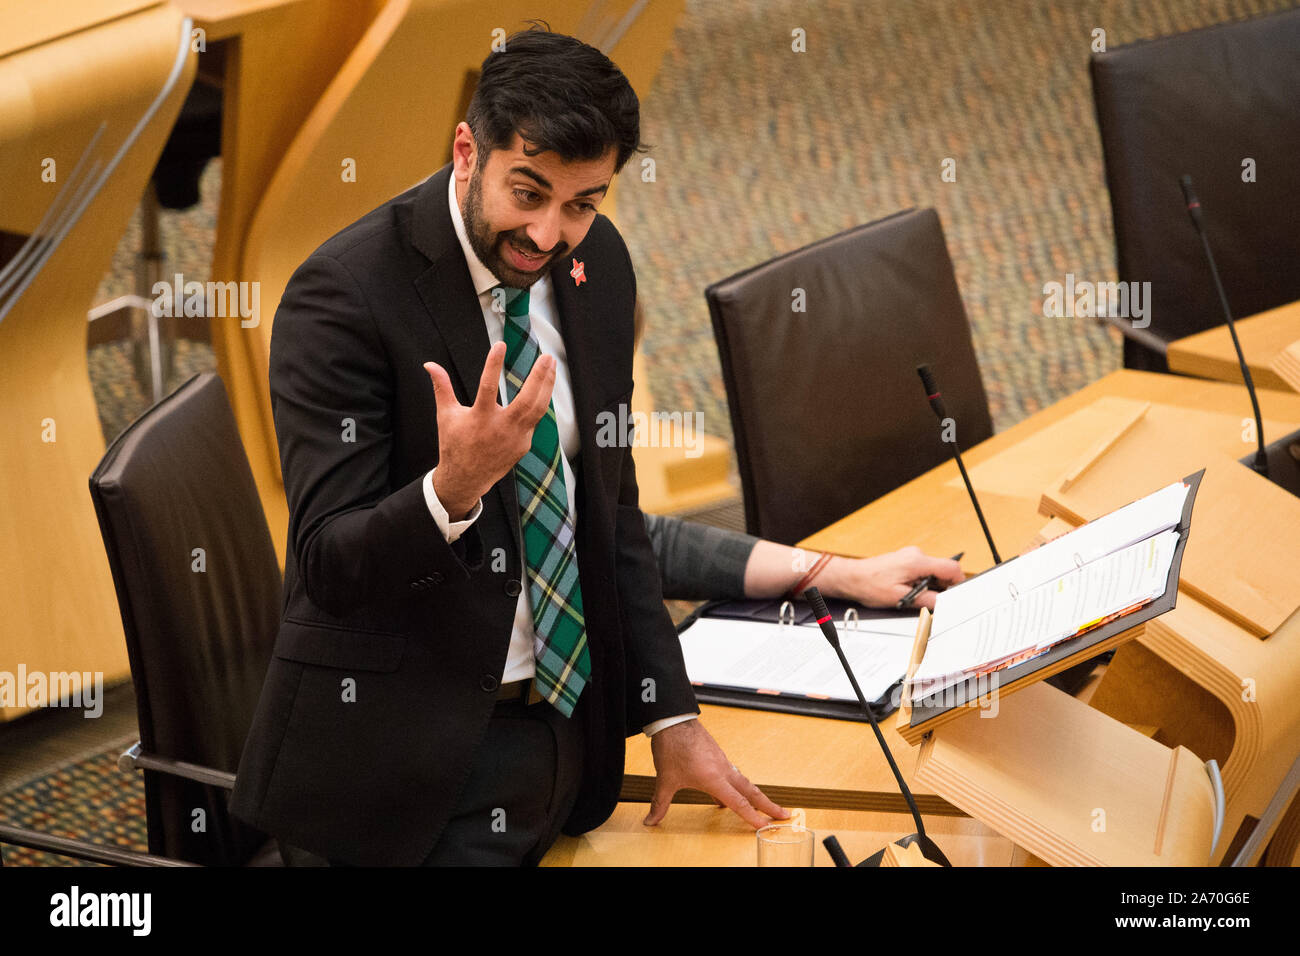 Edinburgh, UK. 29th Oct, 2019. Edinburgh, 29 October 2019.Pictured: Yousaf Humza MSP - Cabinet Minister for Justice. Speaking in the Parliament about the 39 Chinese people found dead in the back of a lorry in response to a question being asked: To ask the Scottish Government what resources it is allocating to address human trafficking and exploitation. Credit: Colin Fisher/Alamy Live News Stock Photo